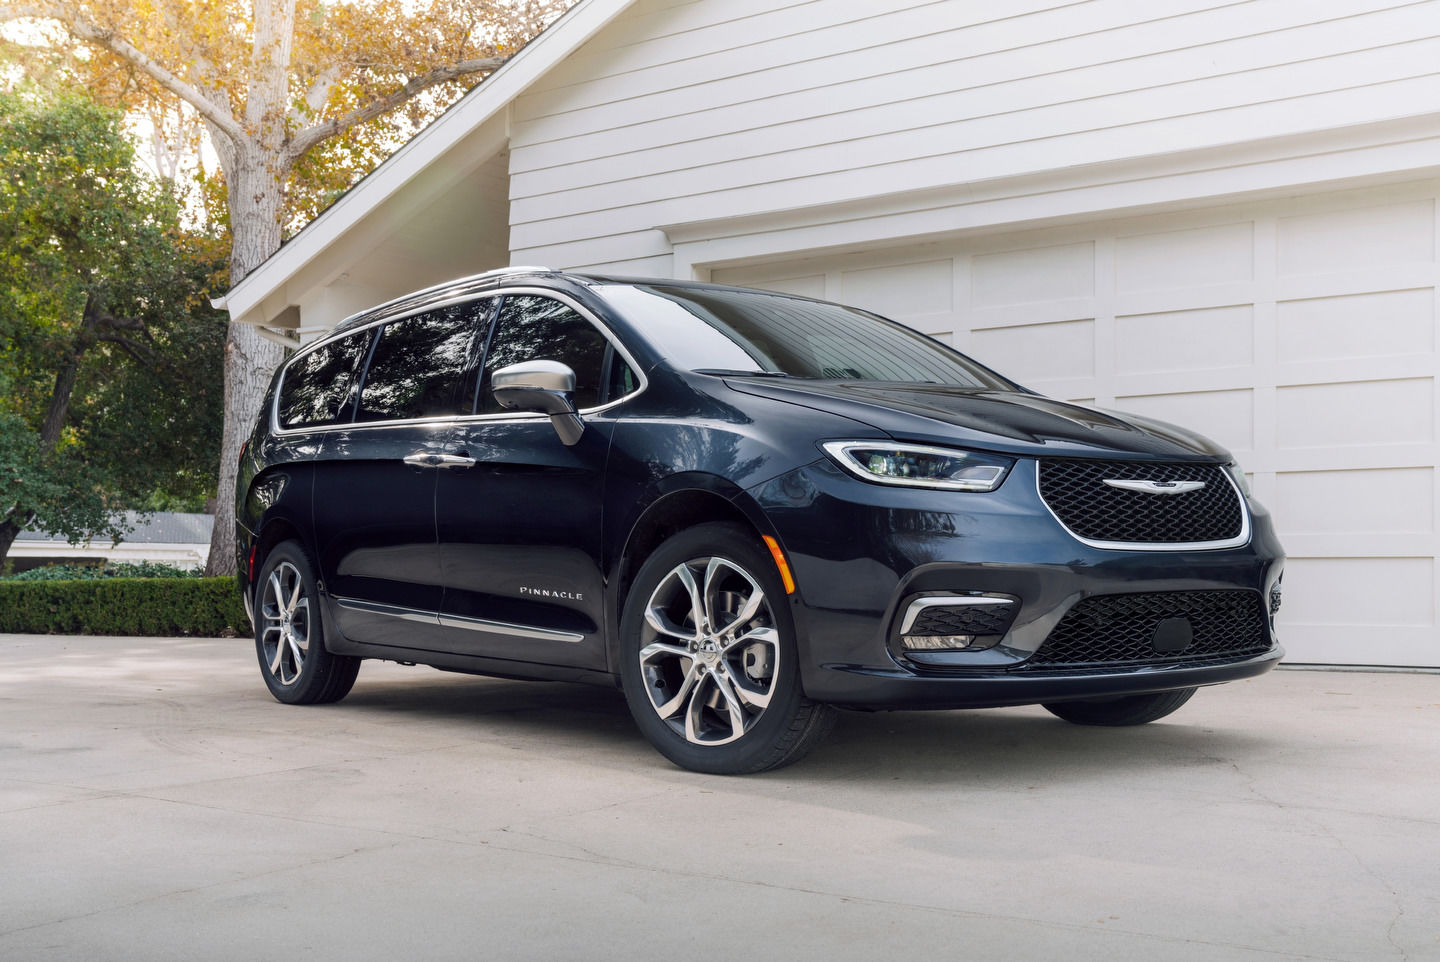 Chrysler Pacifica receives highest possible IIHS safety rating